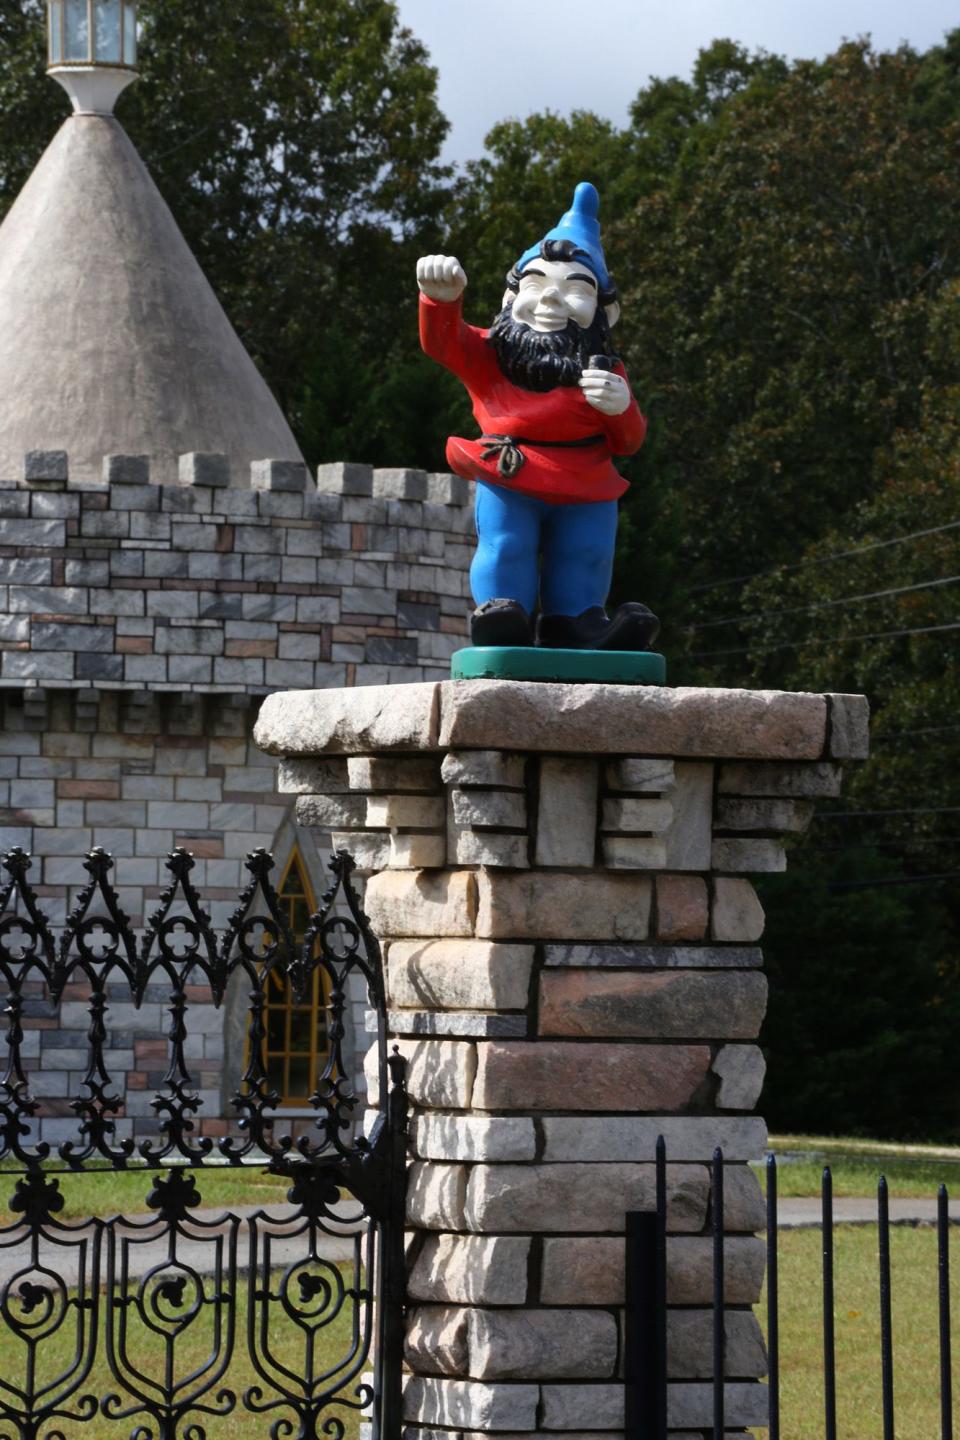 You can find info about the castle on several websites, but here's what the AJC.com's Mitchell Northam found out.